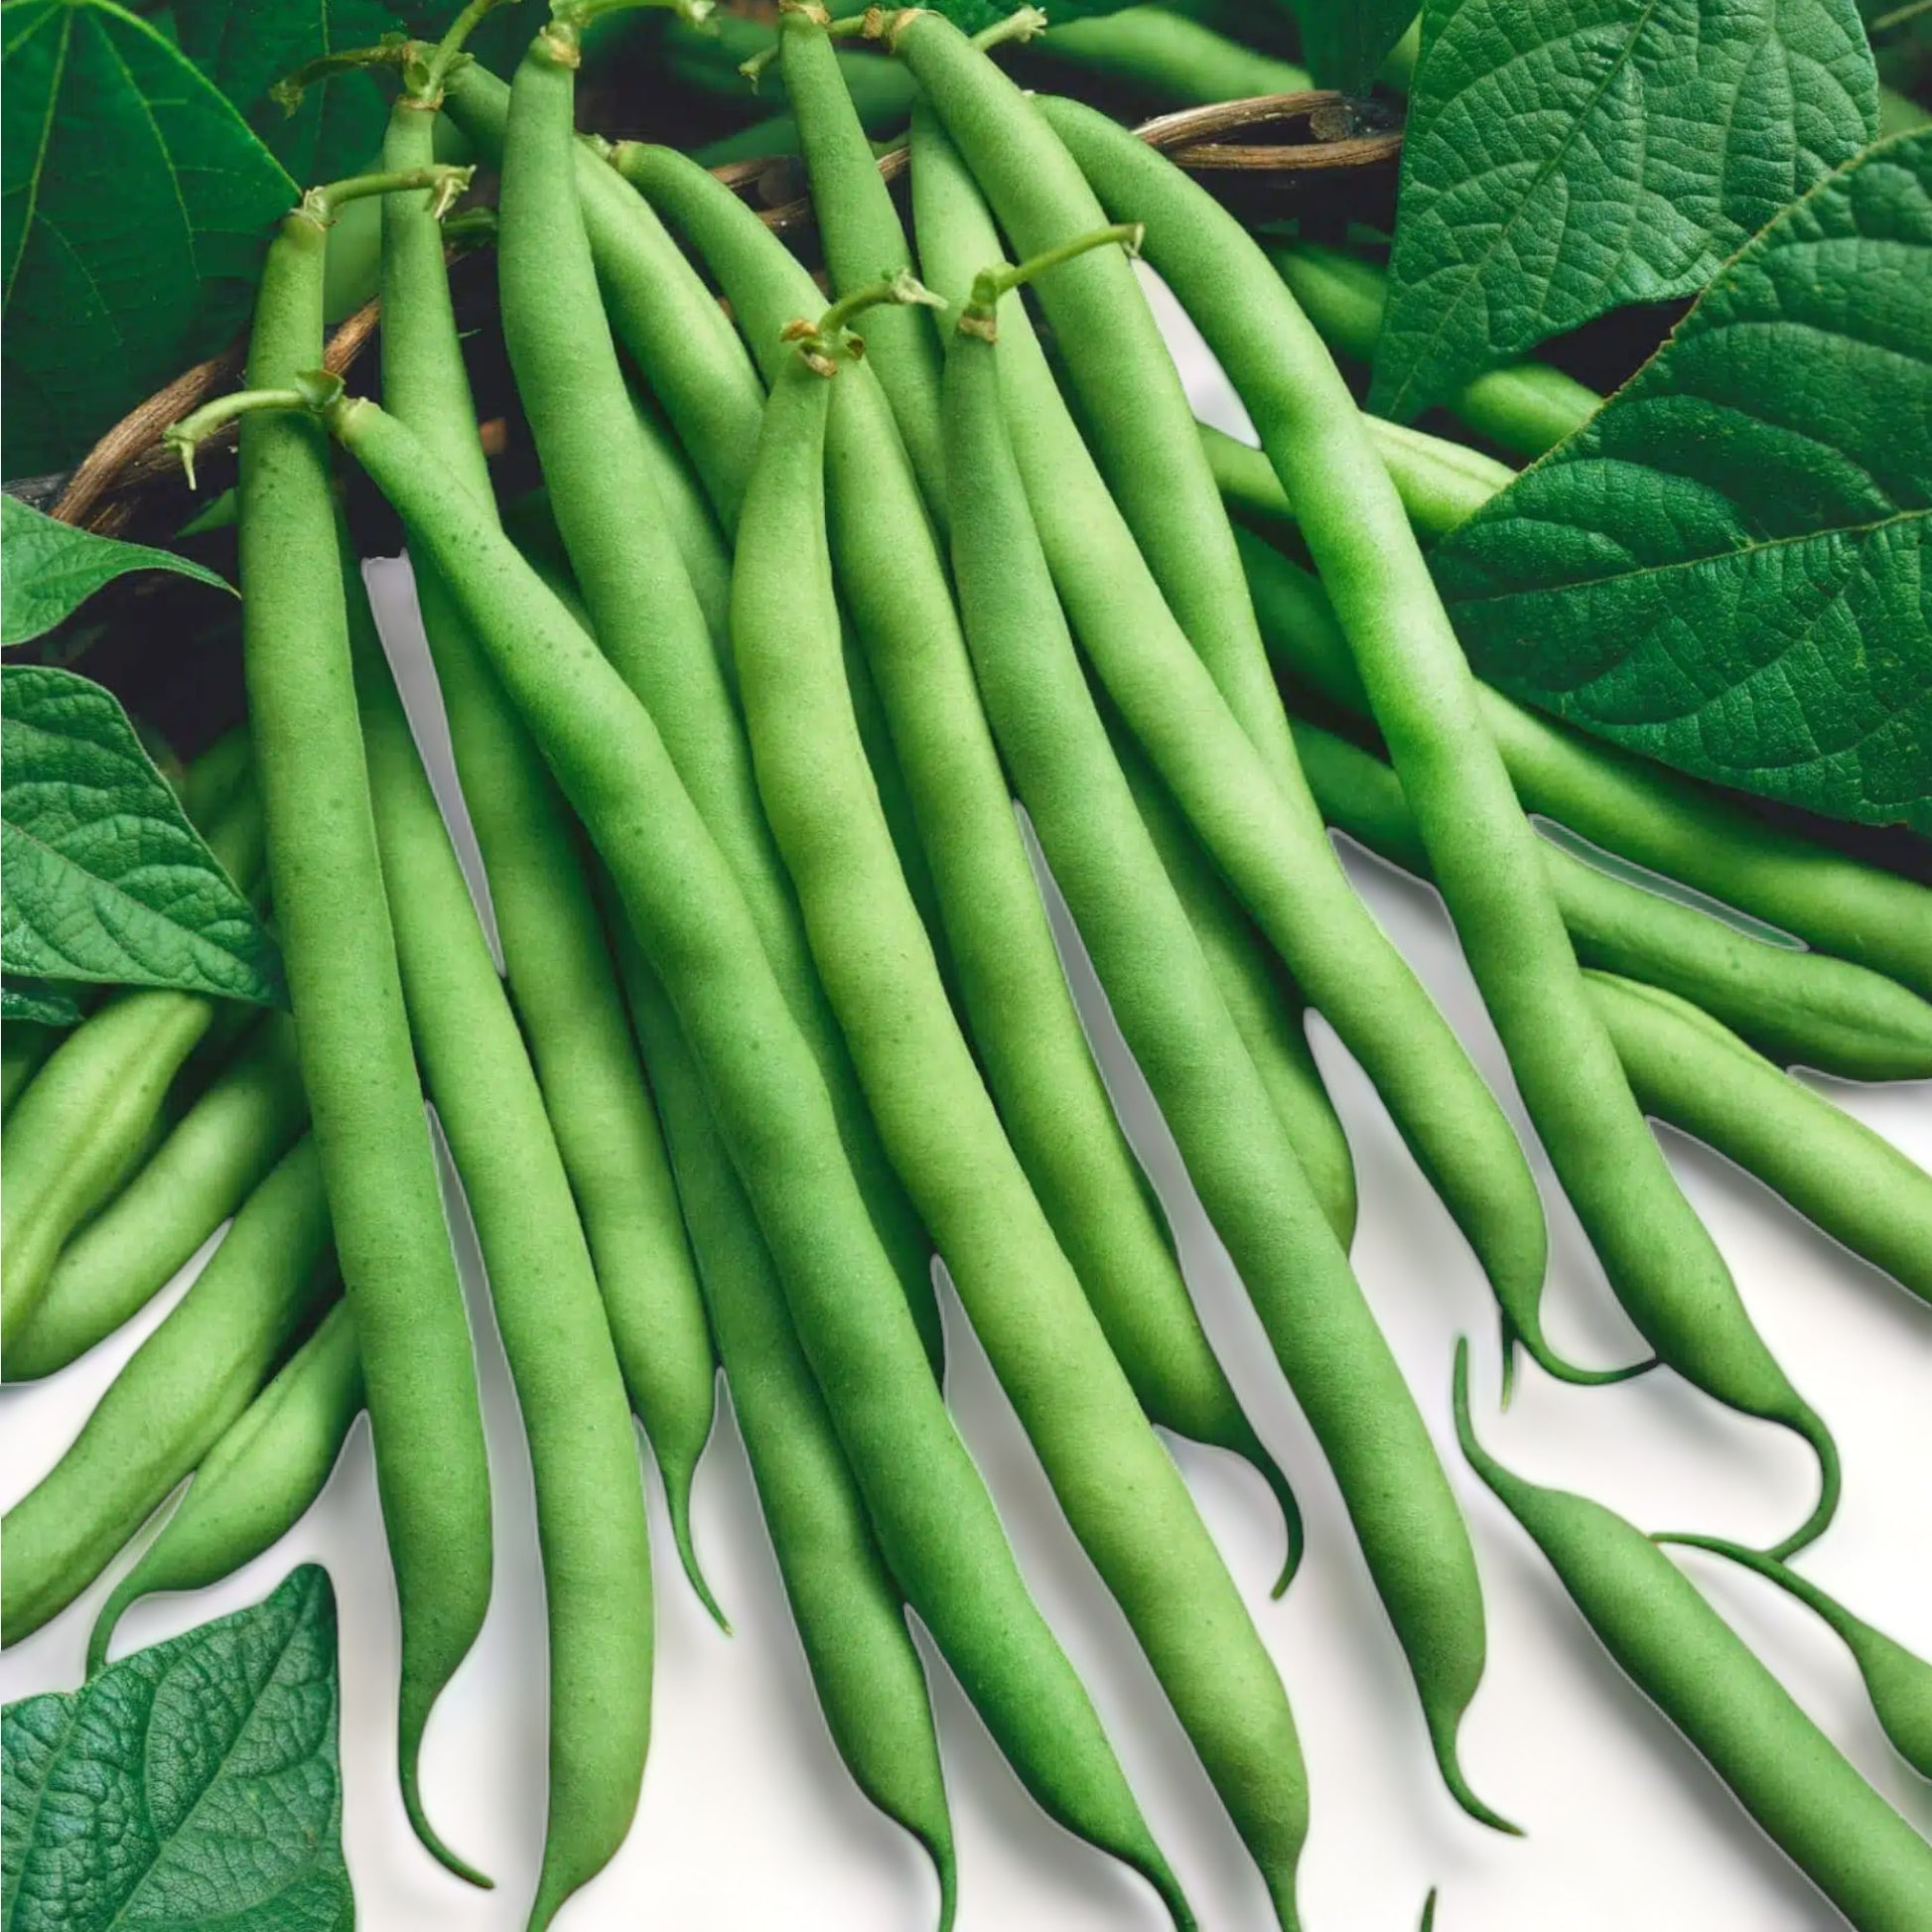 Heirloom Provider green beans scattered on display with leaves